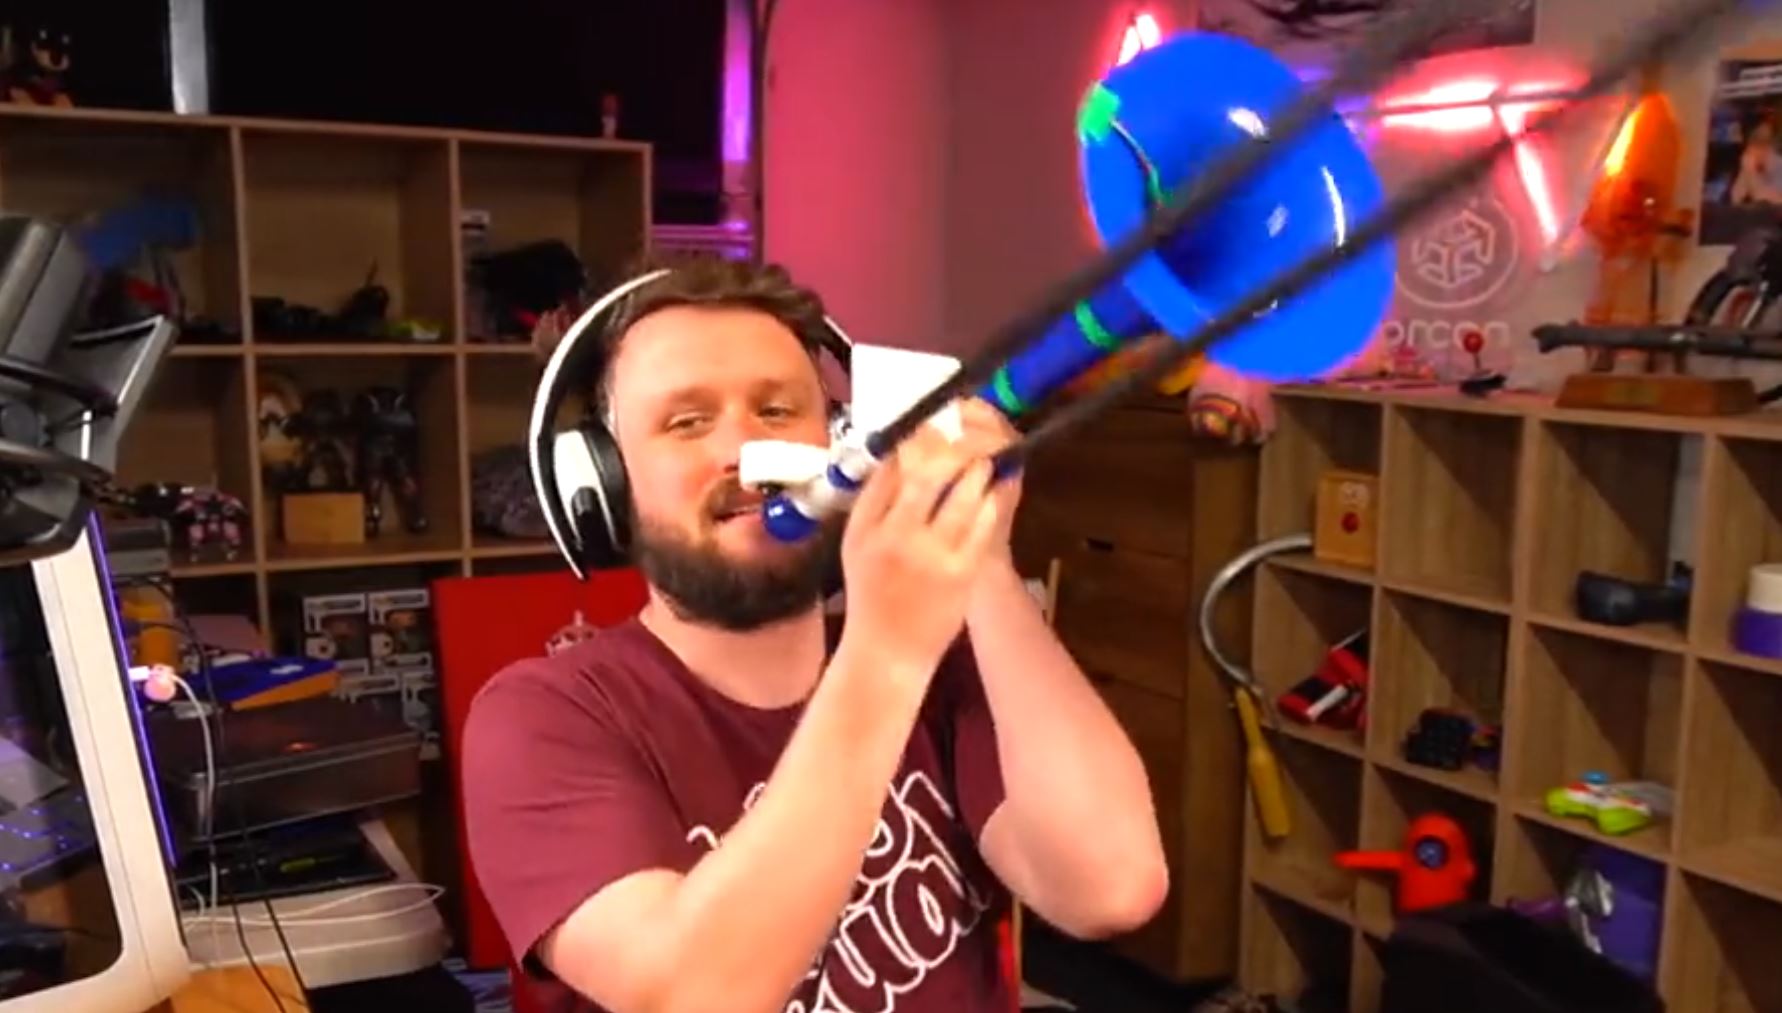  Check out these trombone controller mods to make you the real Trombone Champ  